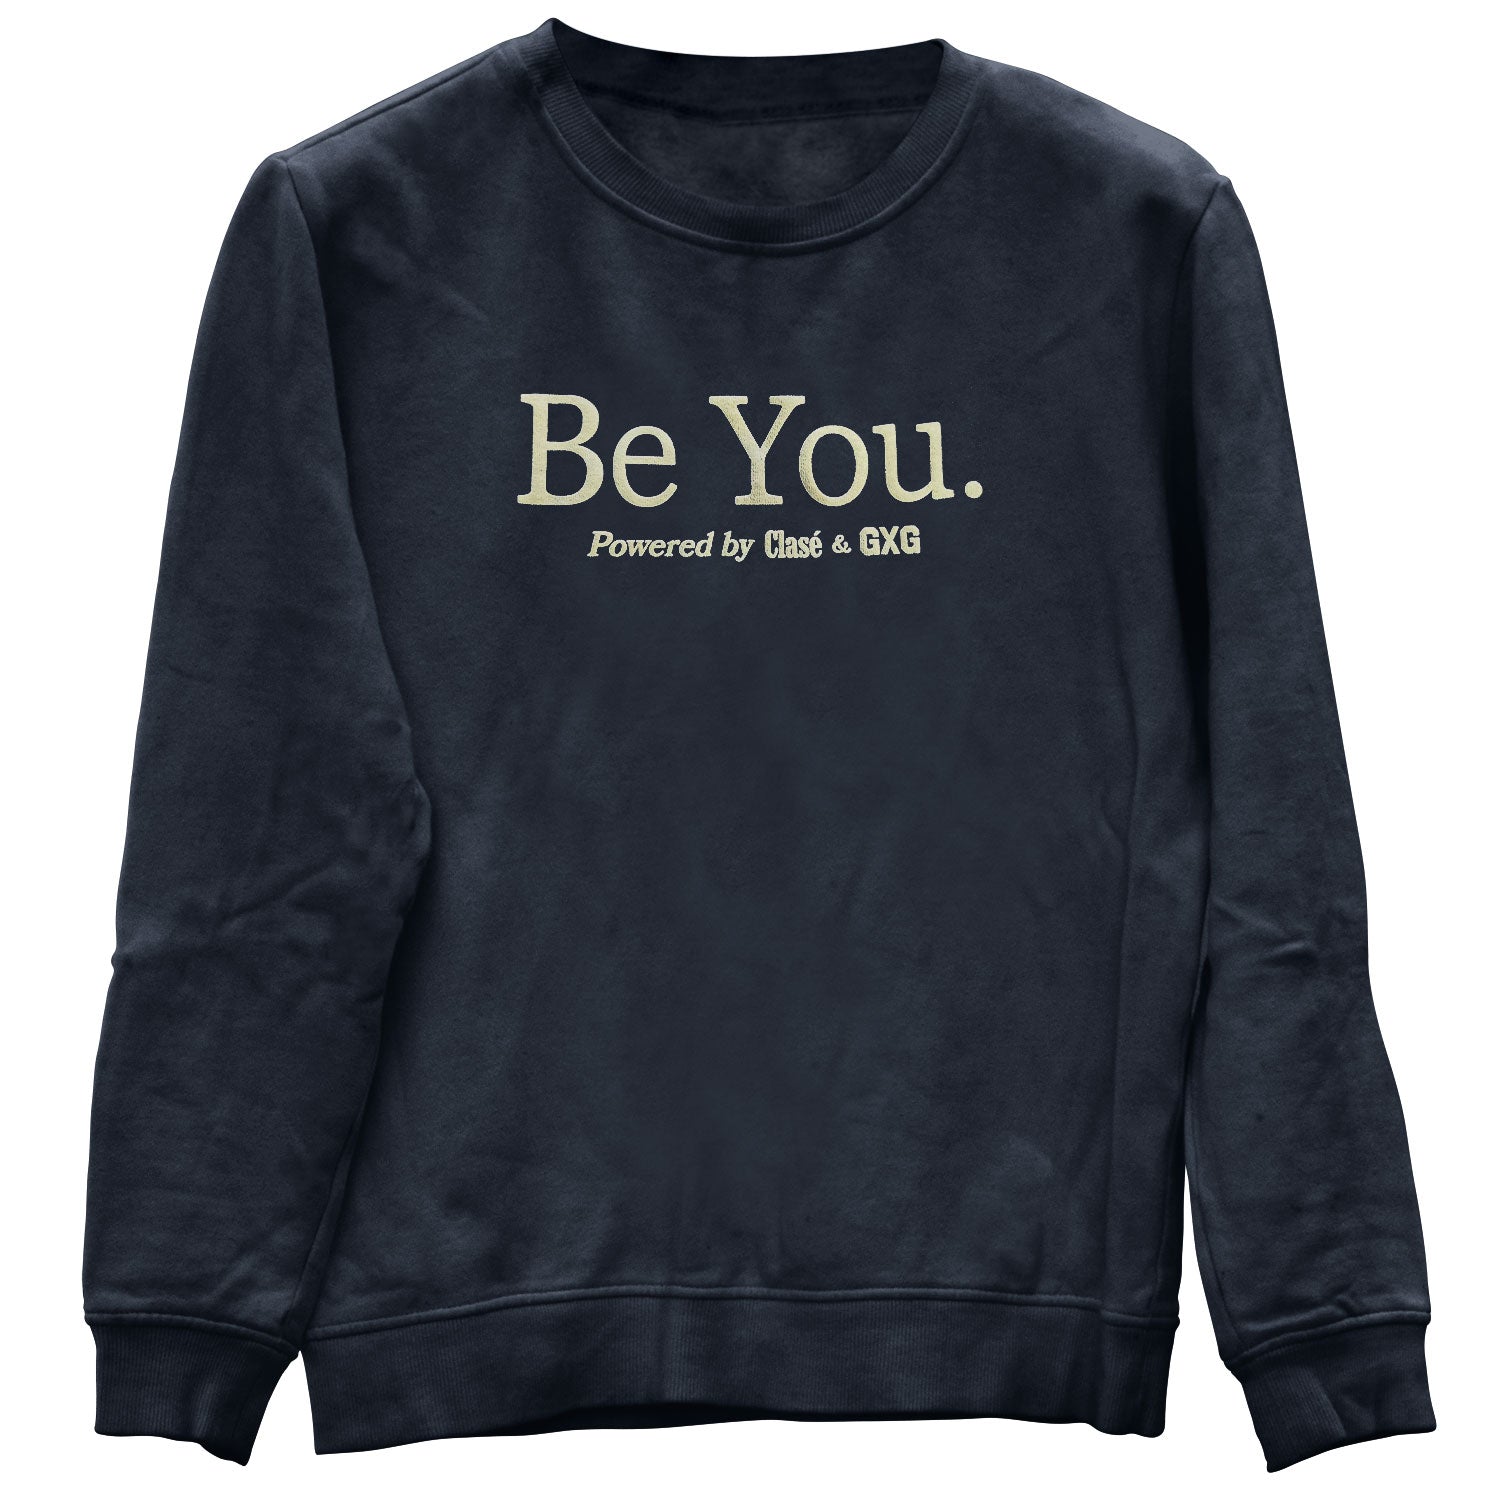 Collab with GXG & Clasé Vintage "Be You." Sweater